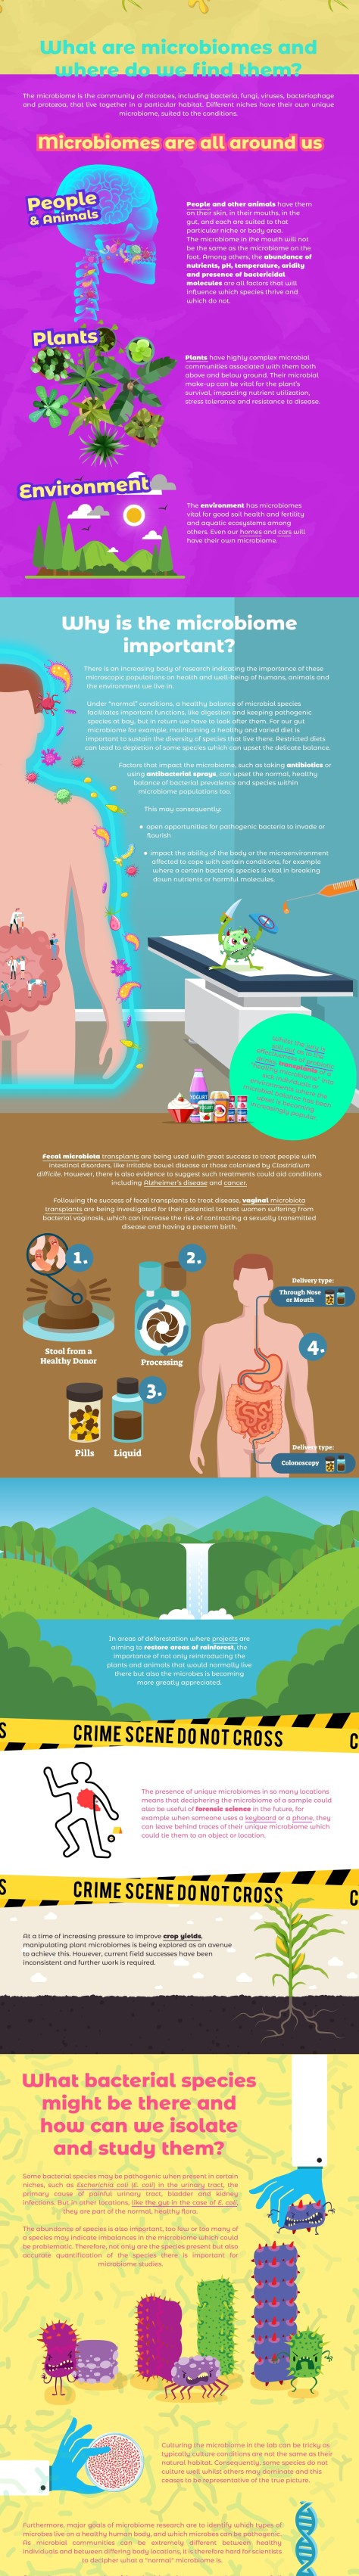 The Microbiome Infographic January 2020